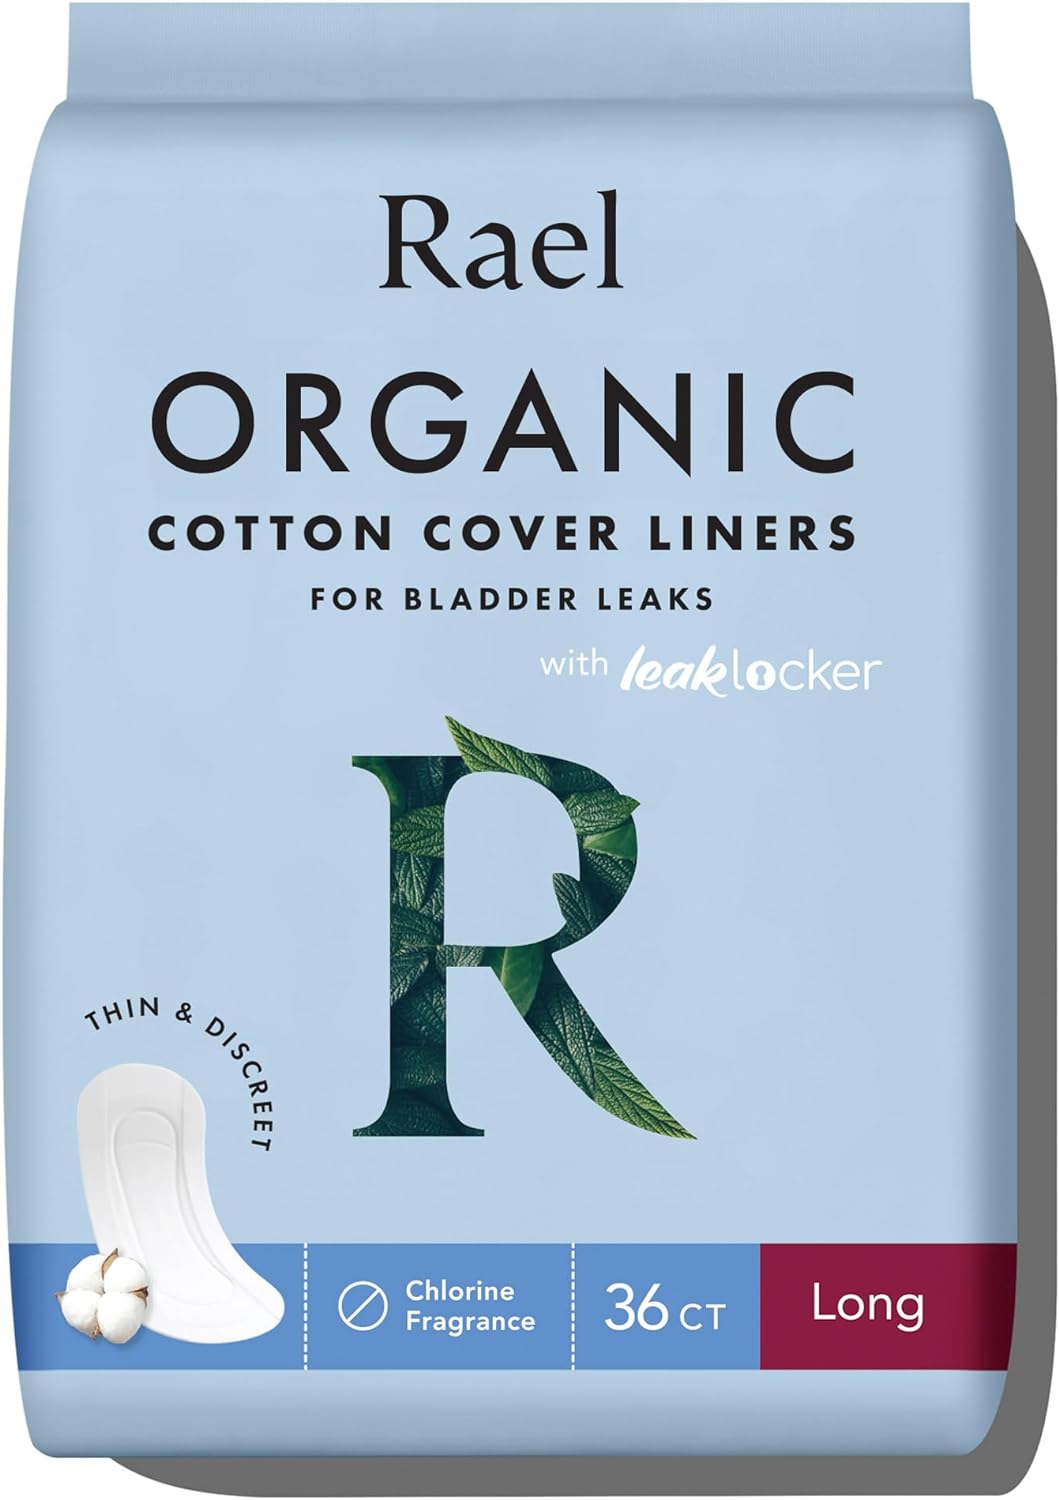 Rael Incontinence Liners for Women, Organic Cotton Cover - Postpartum Essential, Regular Absorbency, Bladder Leak Control, 4 Layer Core with Leak Guard Technology, (Long, 36 Count)